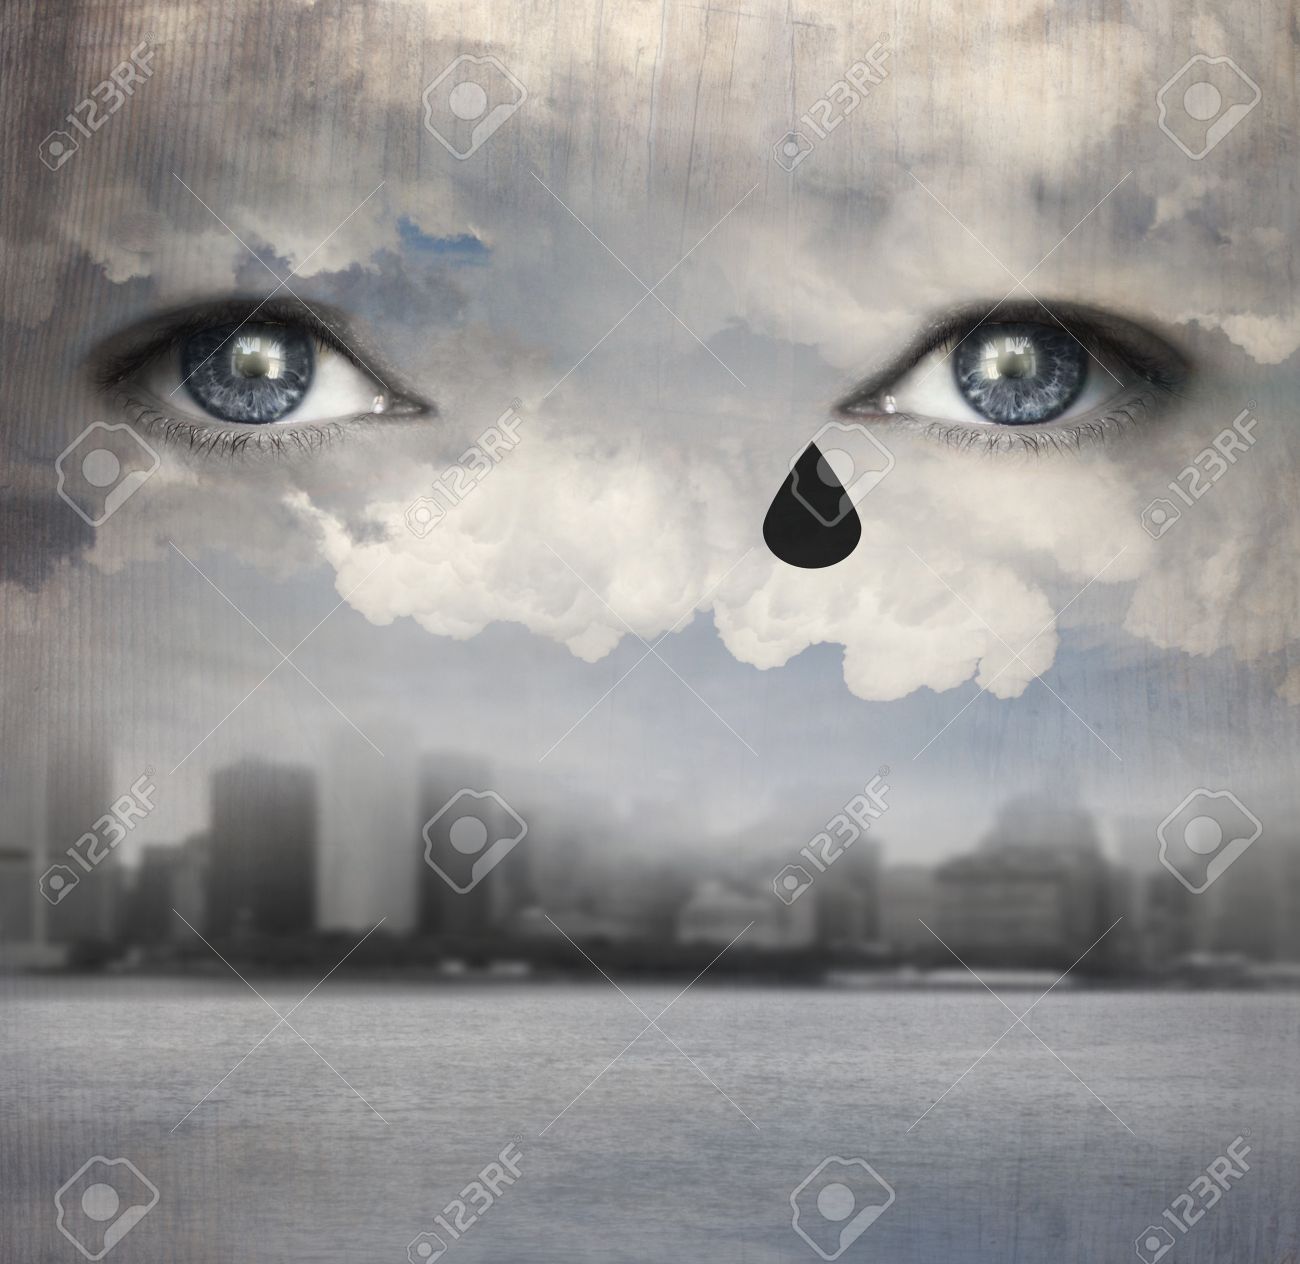 Surreal Background Representing Two Human Eyes Crying Up From